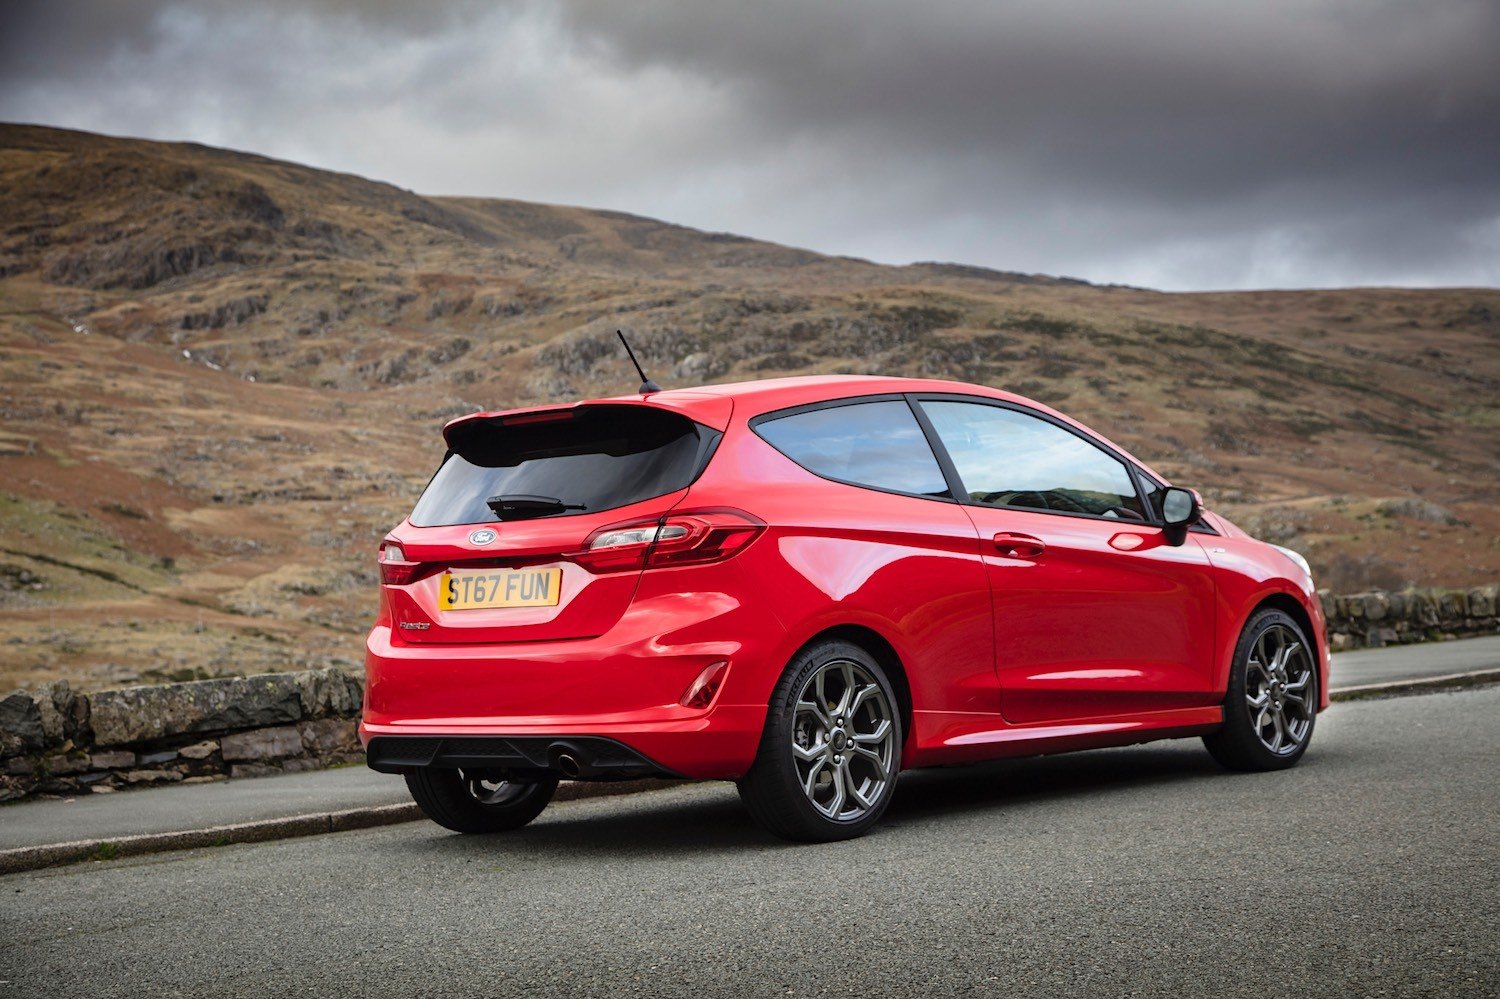 Neil Lyndon drives the All-New Ford Fiesta ST-Line 8